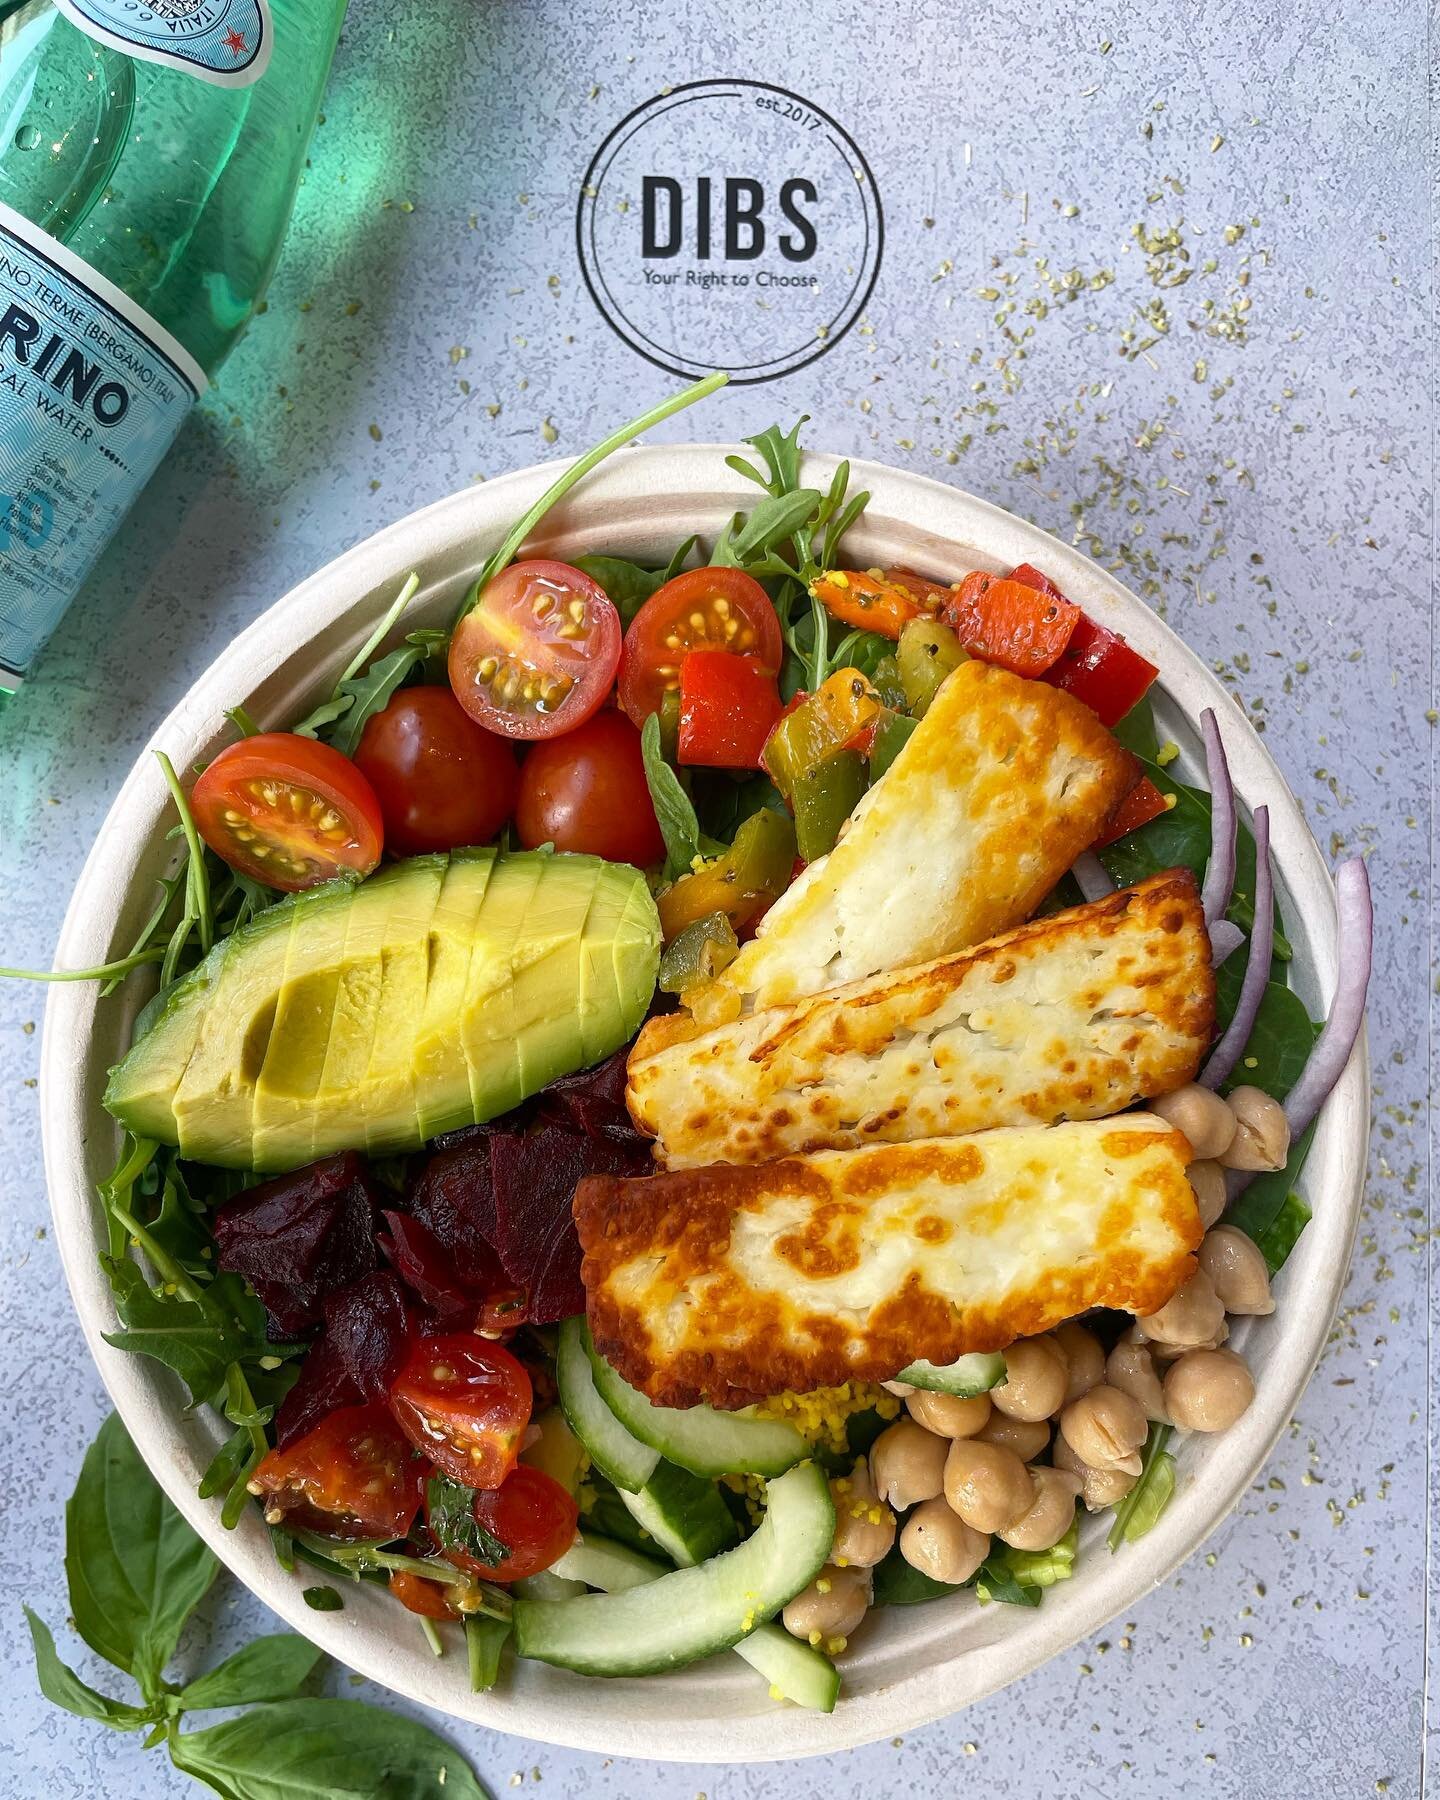 We offer a wide selection of salad bowls 🥗, you can even customise you&rsquo;re own 😋 

Come and give our bowls a try @dibs.uk